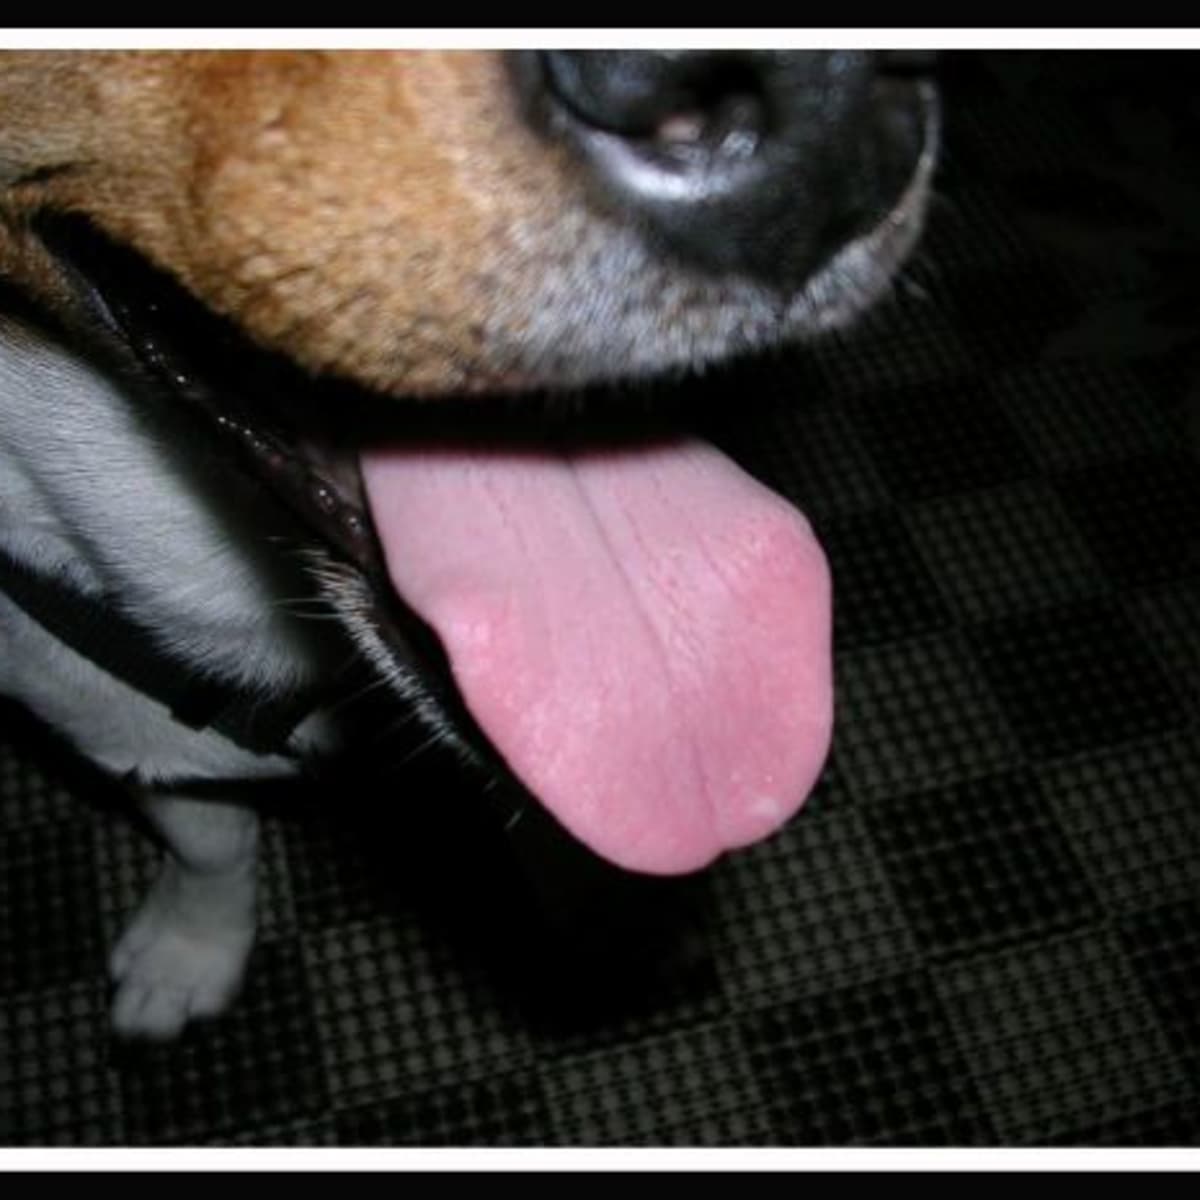 Why Does My Dog Lick Me? The Meaning Behind Dogs Licking Humans · The  Wildest